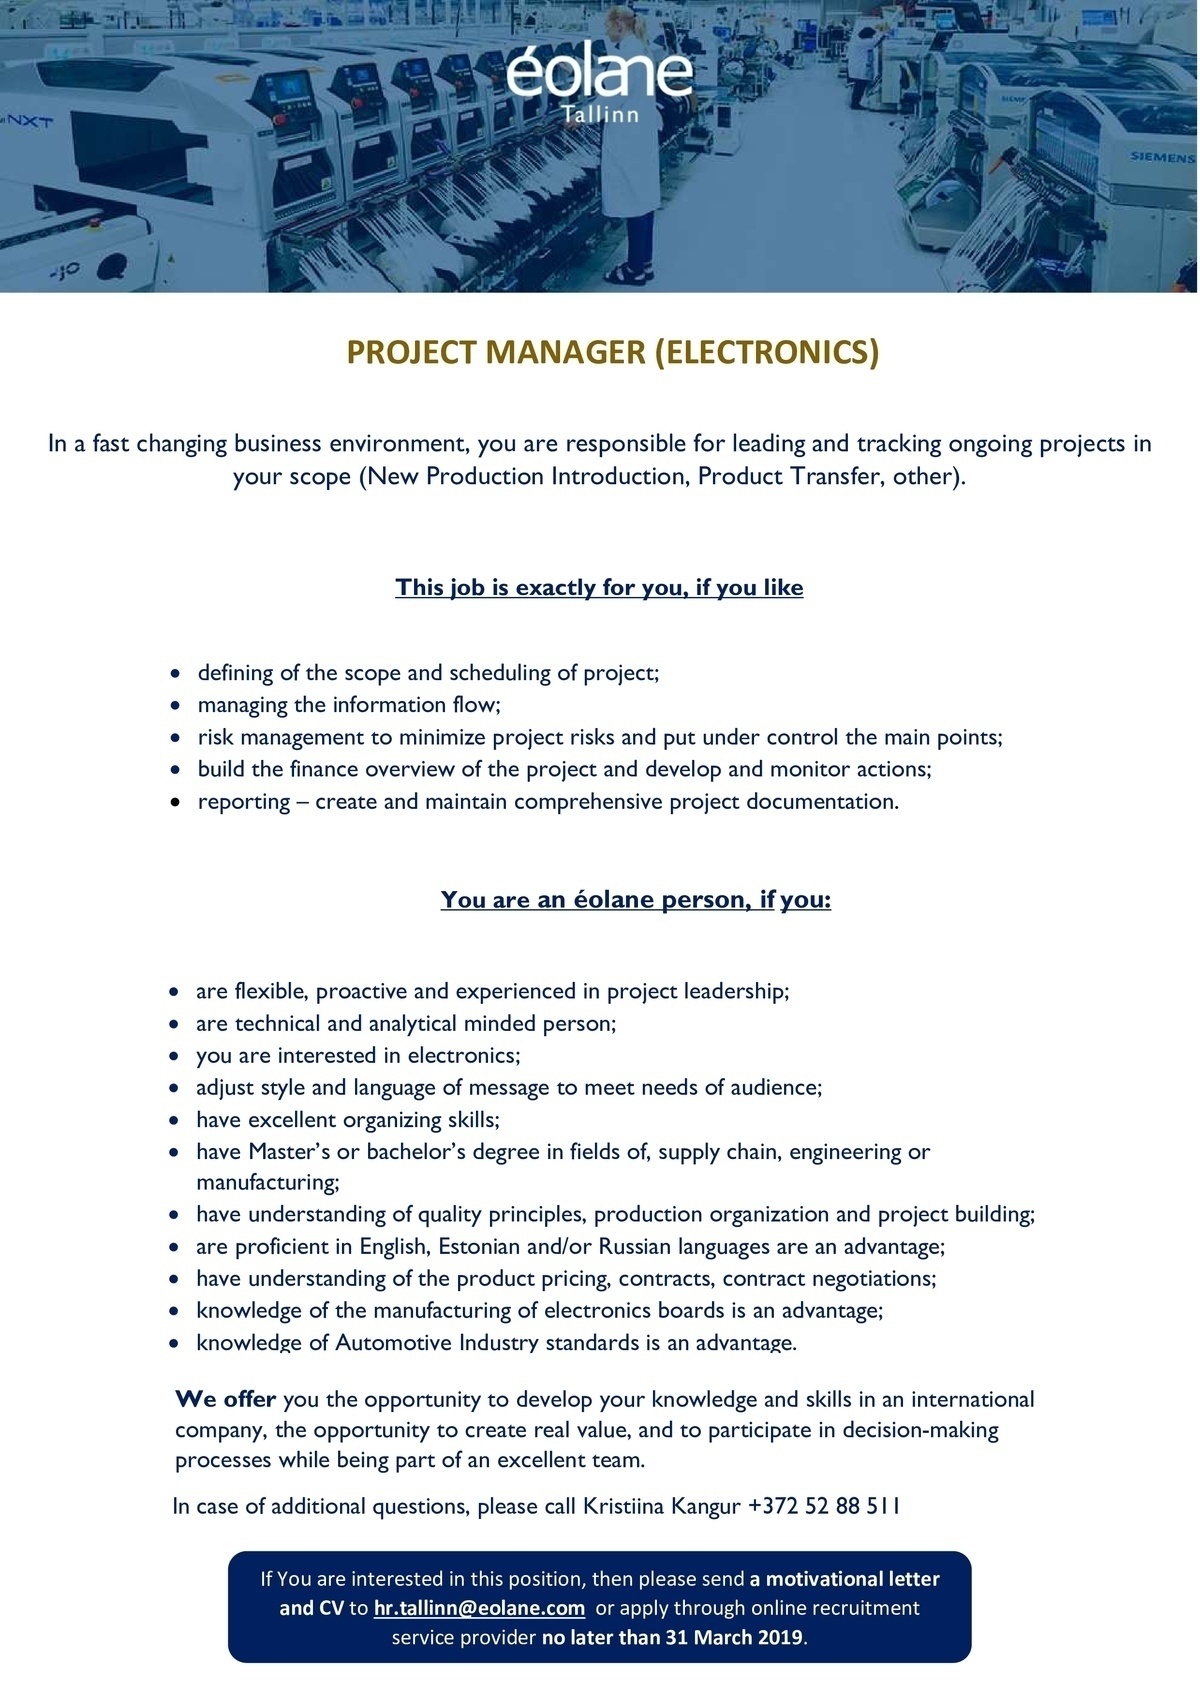 EOLANE TALLINN AS PROJECT MANAGER (ELECTRONICS)